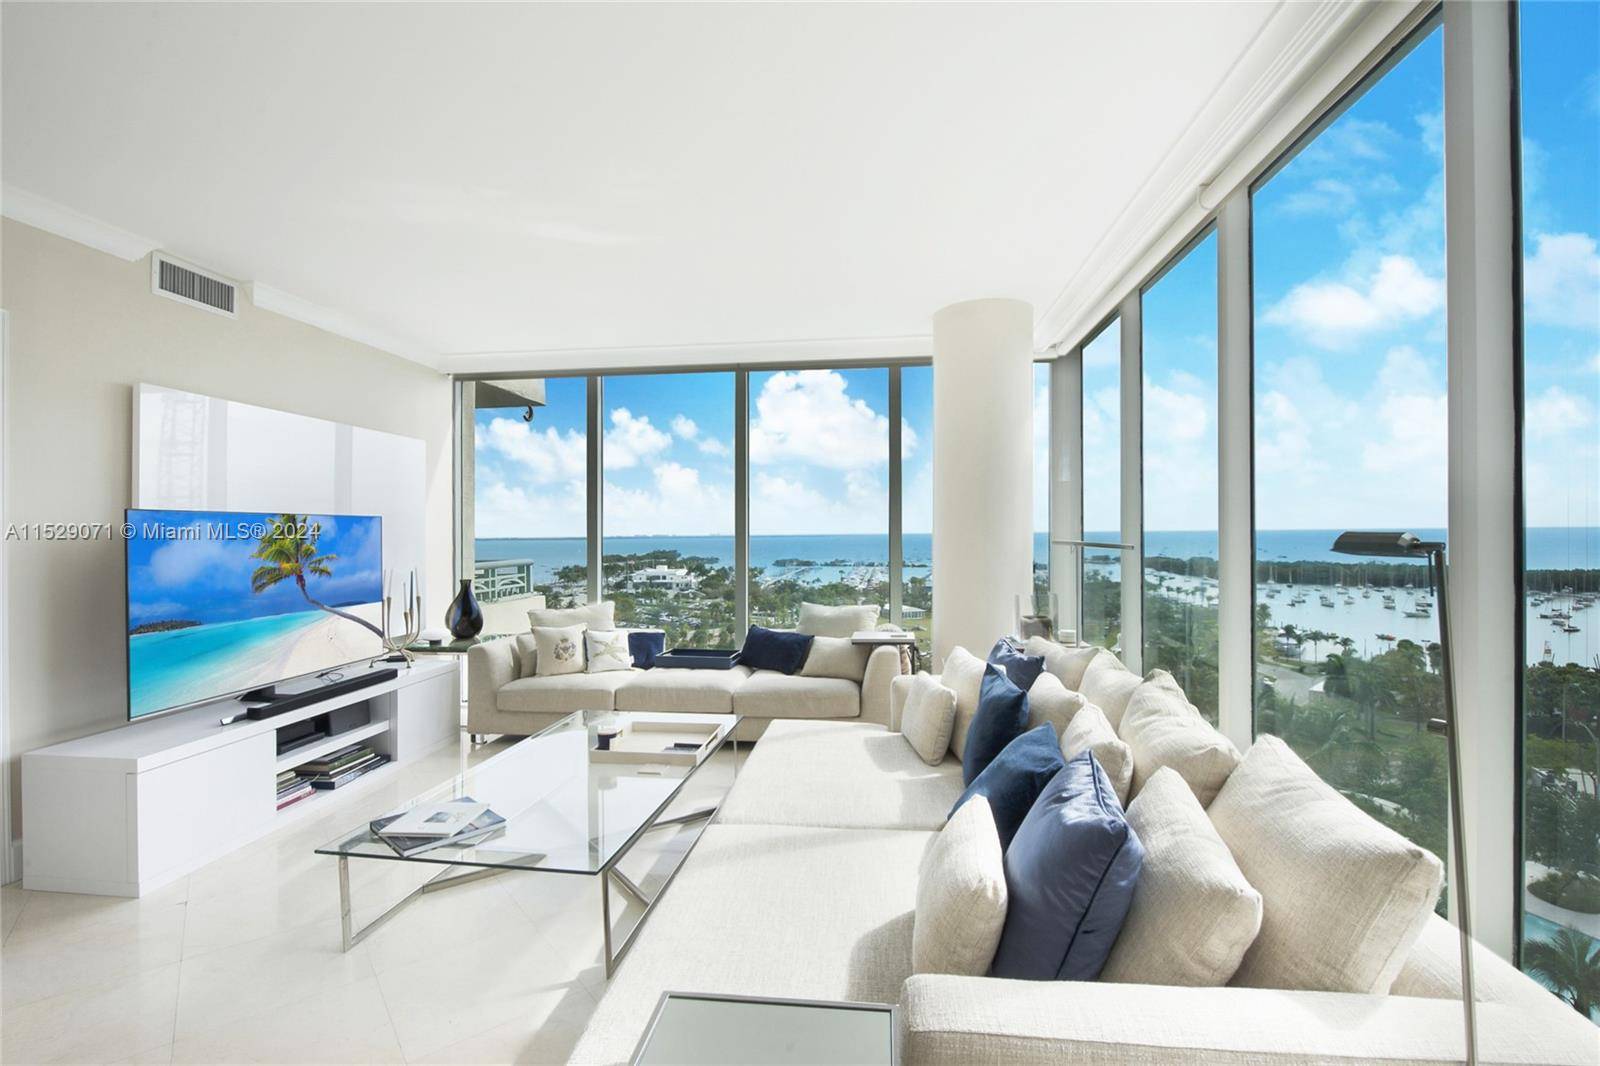 Fully furnished rental with direct unobstructed waterfront views from the floor to ceiling windows and private terraces of this coveted 03 line corner unit at the Ritz Carlton residences in ...